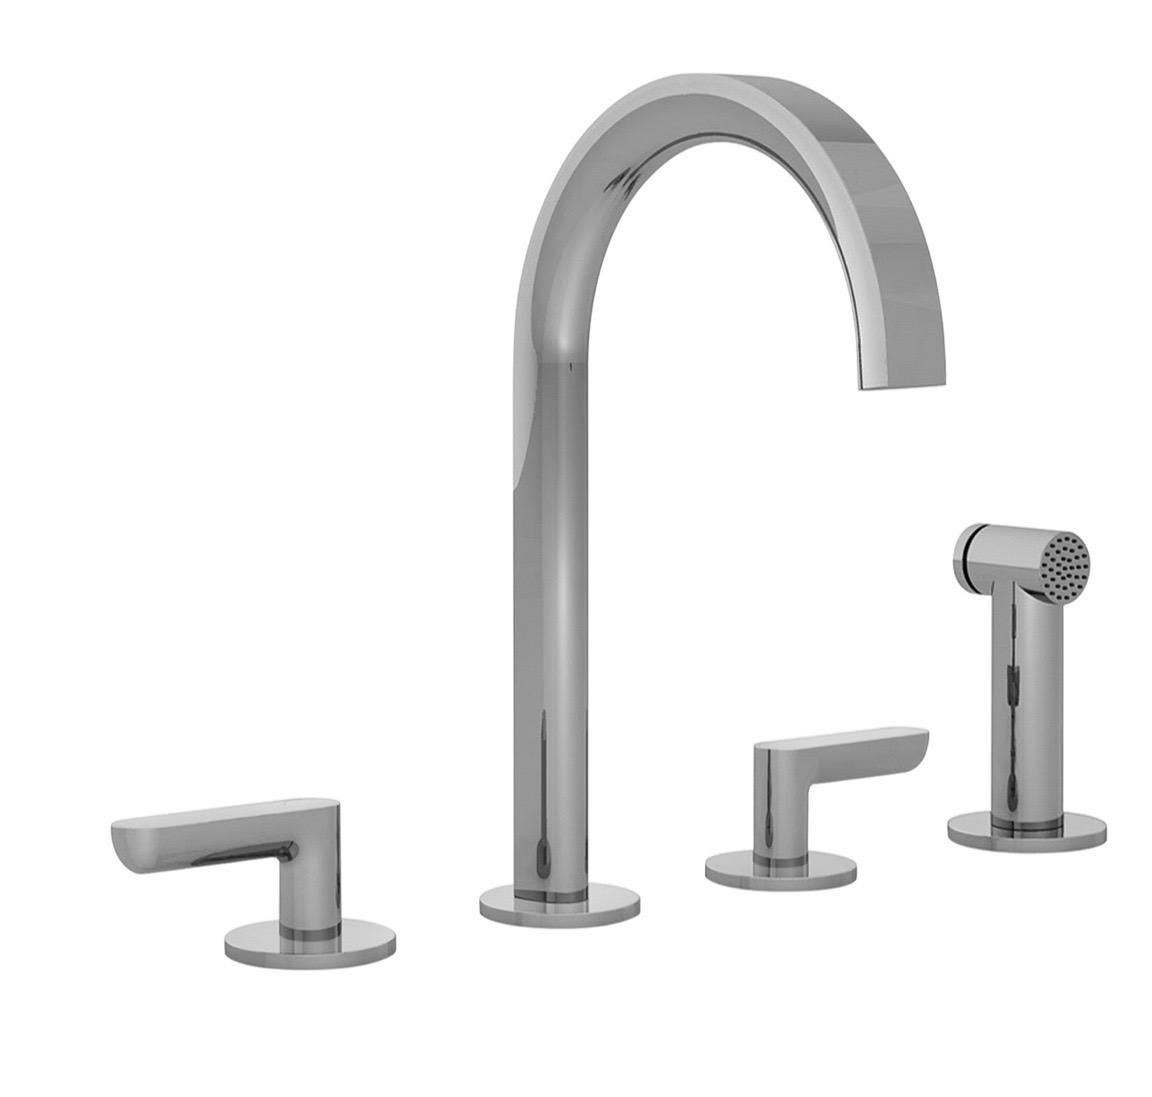 Fantini Icona polished nickel 4-hole kitchen, bar, utility mixer faucet & spray, New in Box, Made in Italy. Gorgeous special order piece. See specs in images.